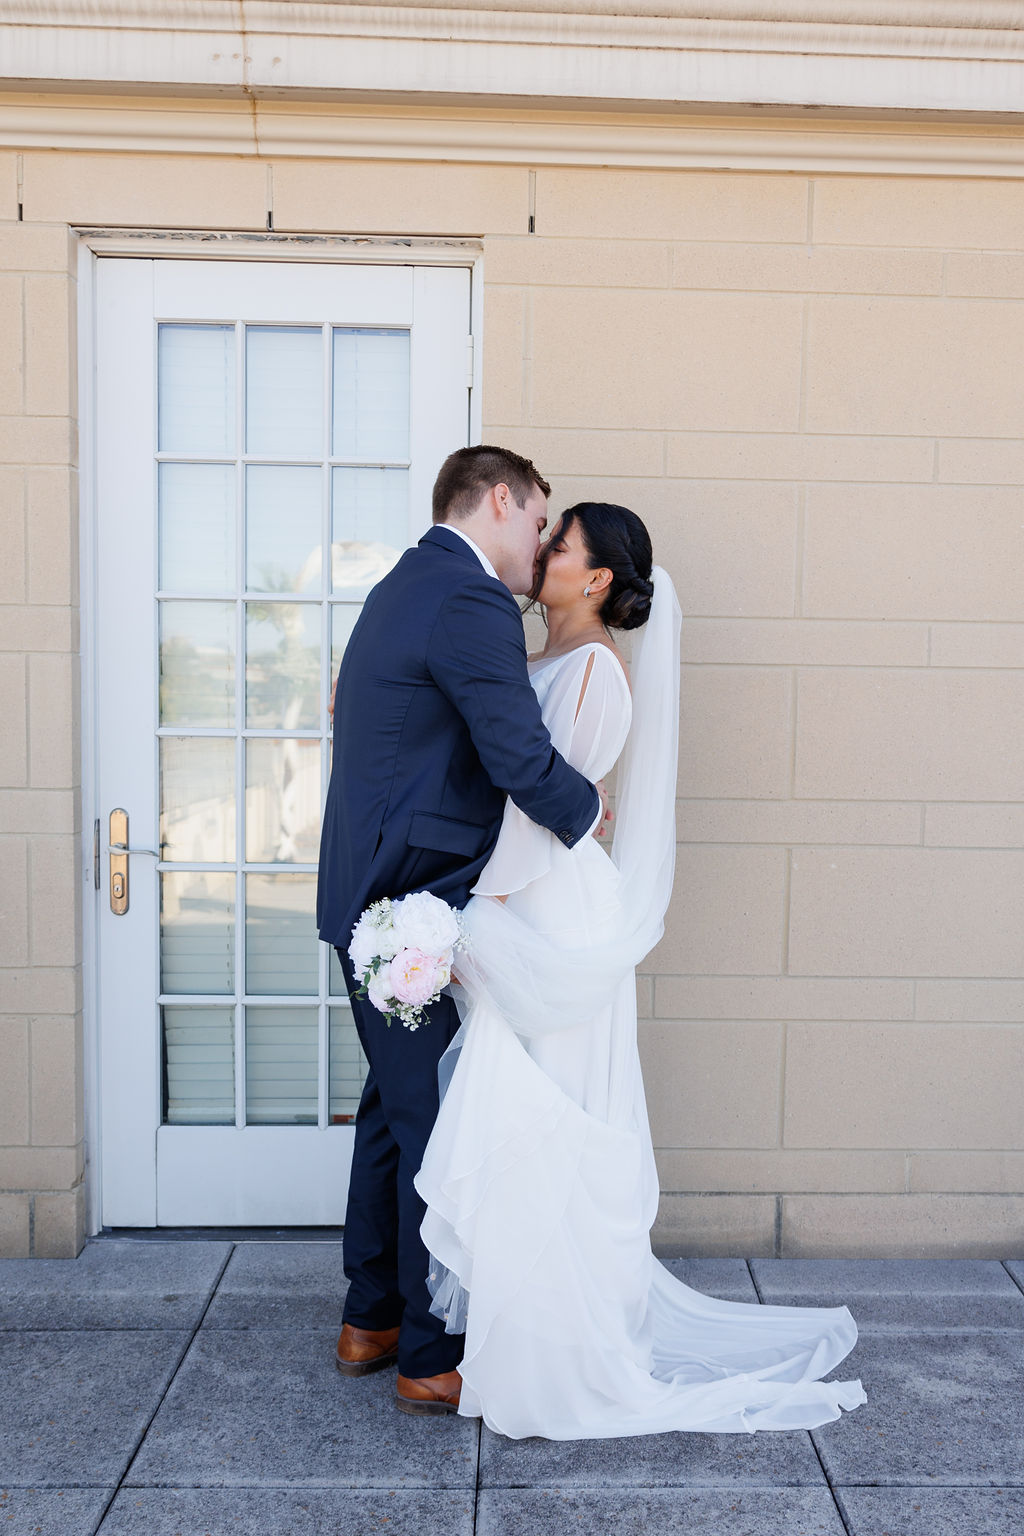 Newlyweds kiss in a back alley